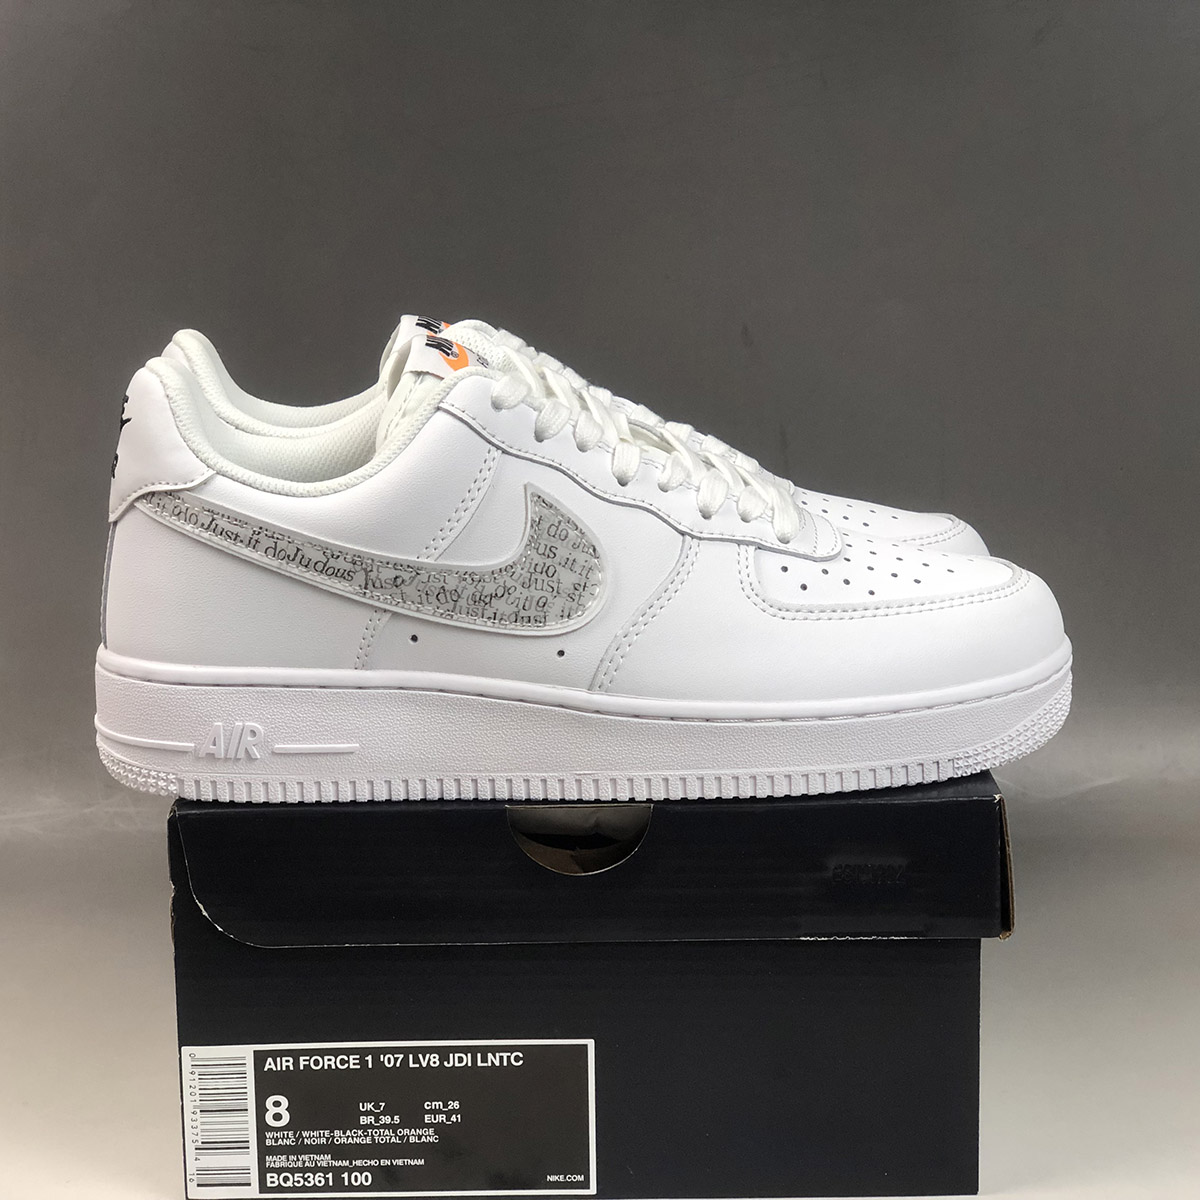 air force 1 low just do it pack white